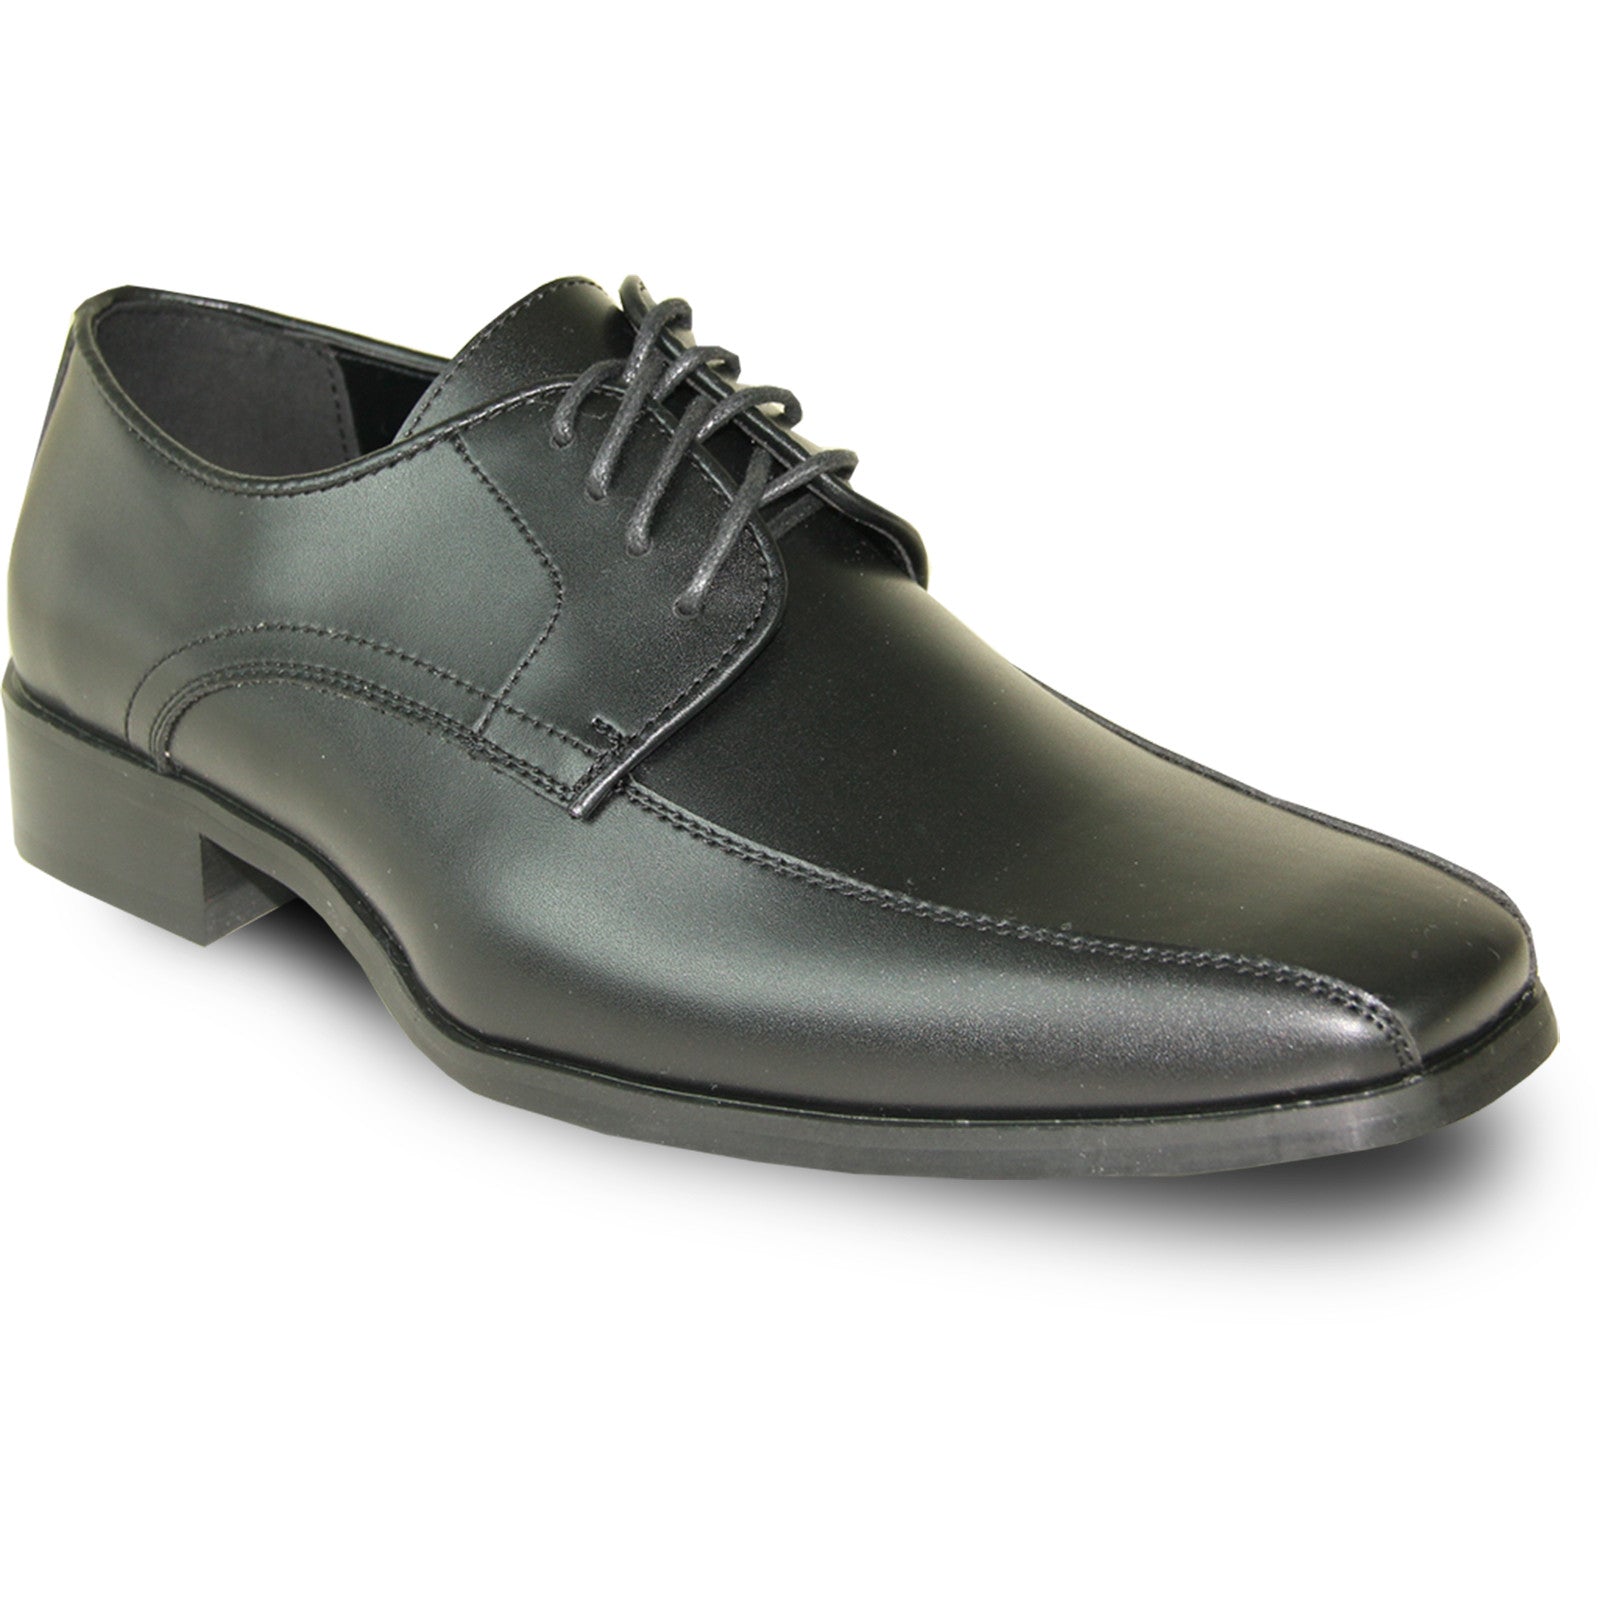 "Black Classic Men's Dress Shoe - Square Pointy Toe Bicycle Style"